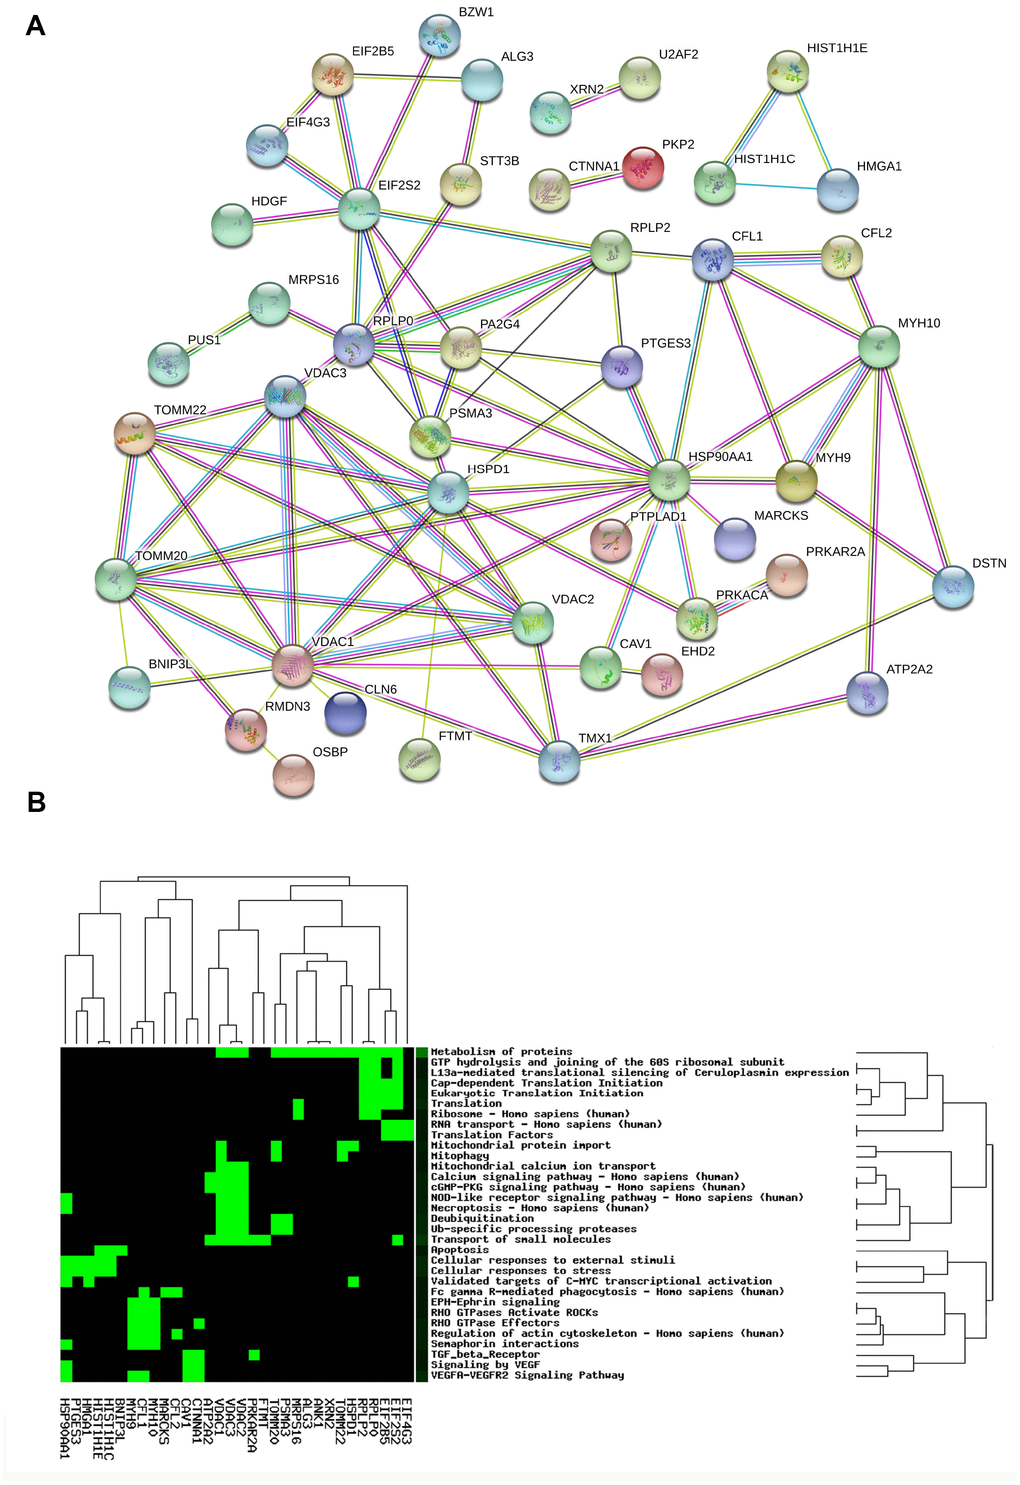 Protein-protein interaction network (A) and statistically significant signaling pathways (B) involved in mtPPs.